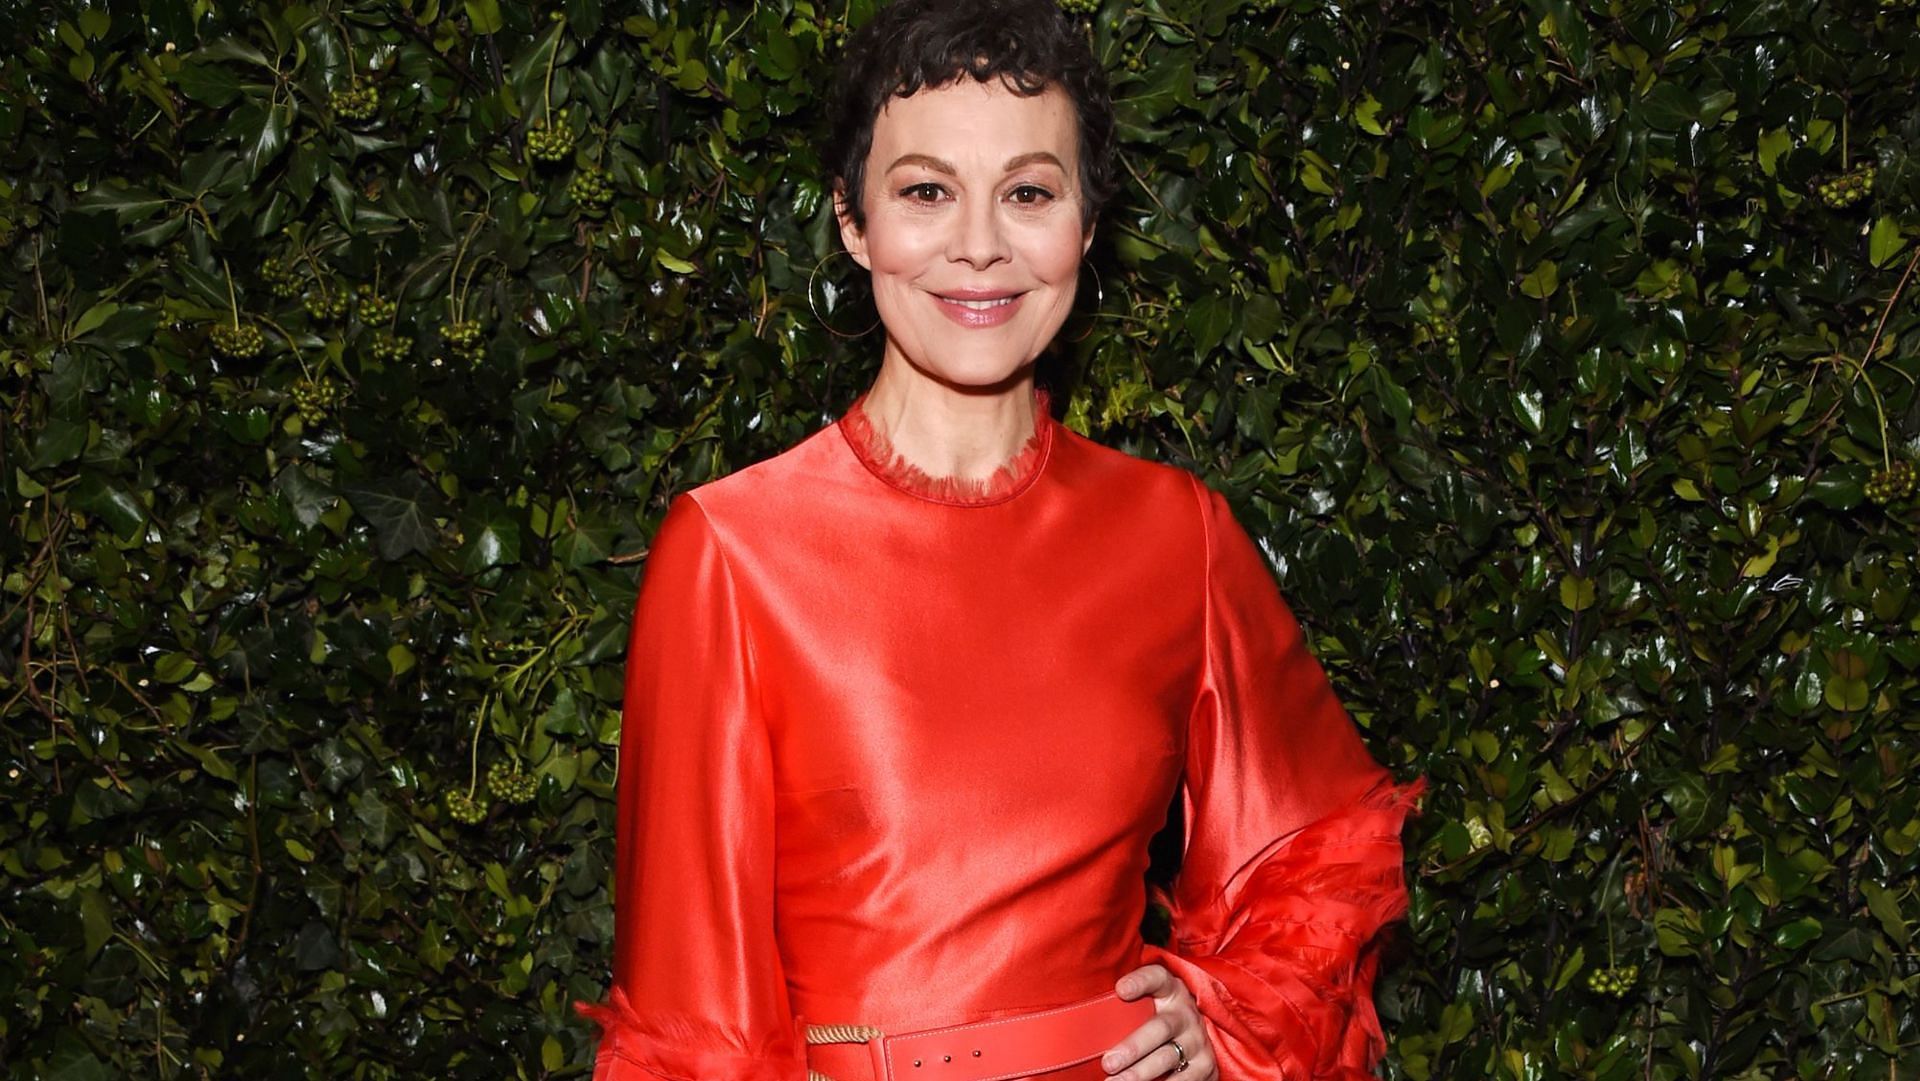 Helen McCrory passed away in 2021 after a secret battle with breast cancer. (Image via David M. Benett/Getty)